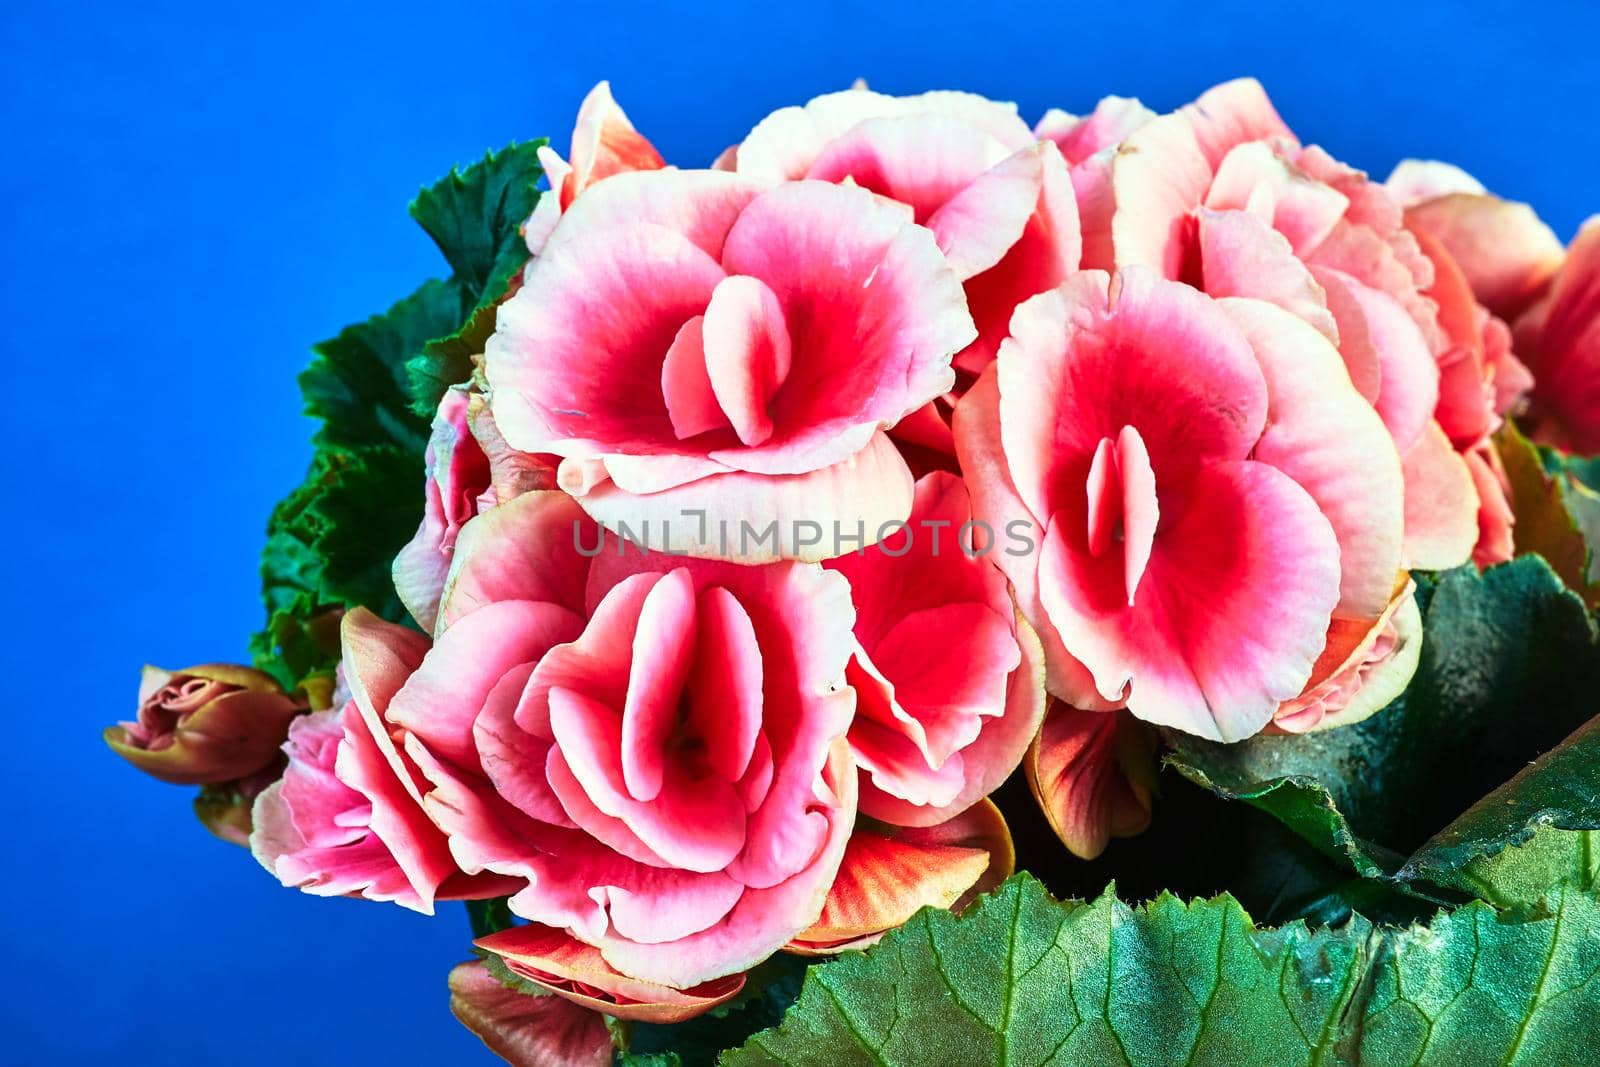 detail of red begonia flowers against blue background in Poland